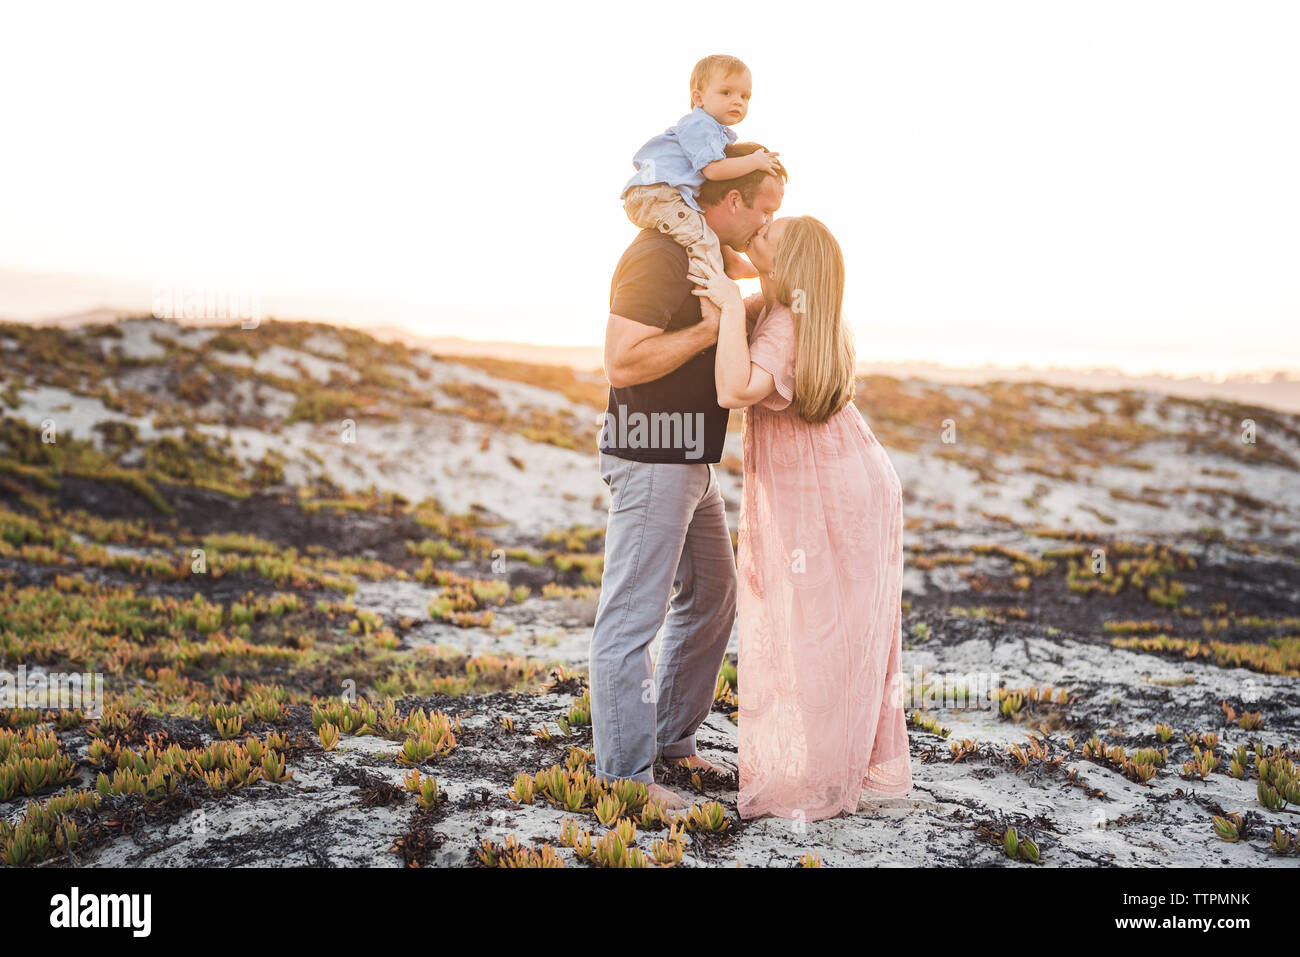 Husband kissing wife while carrying son on shoulders at beach against clear sky during sunset Stock Photo